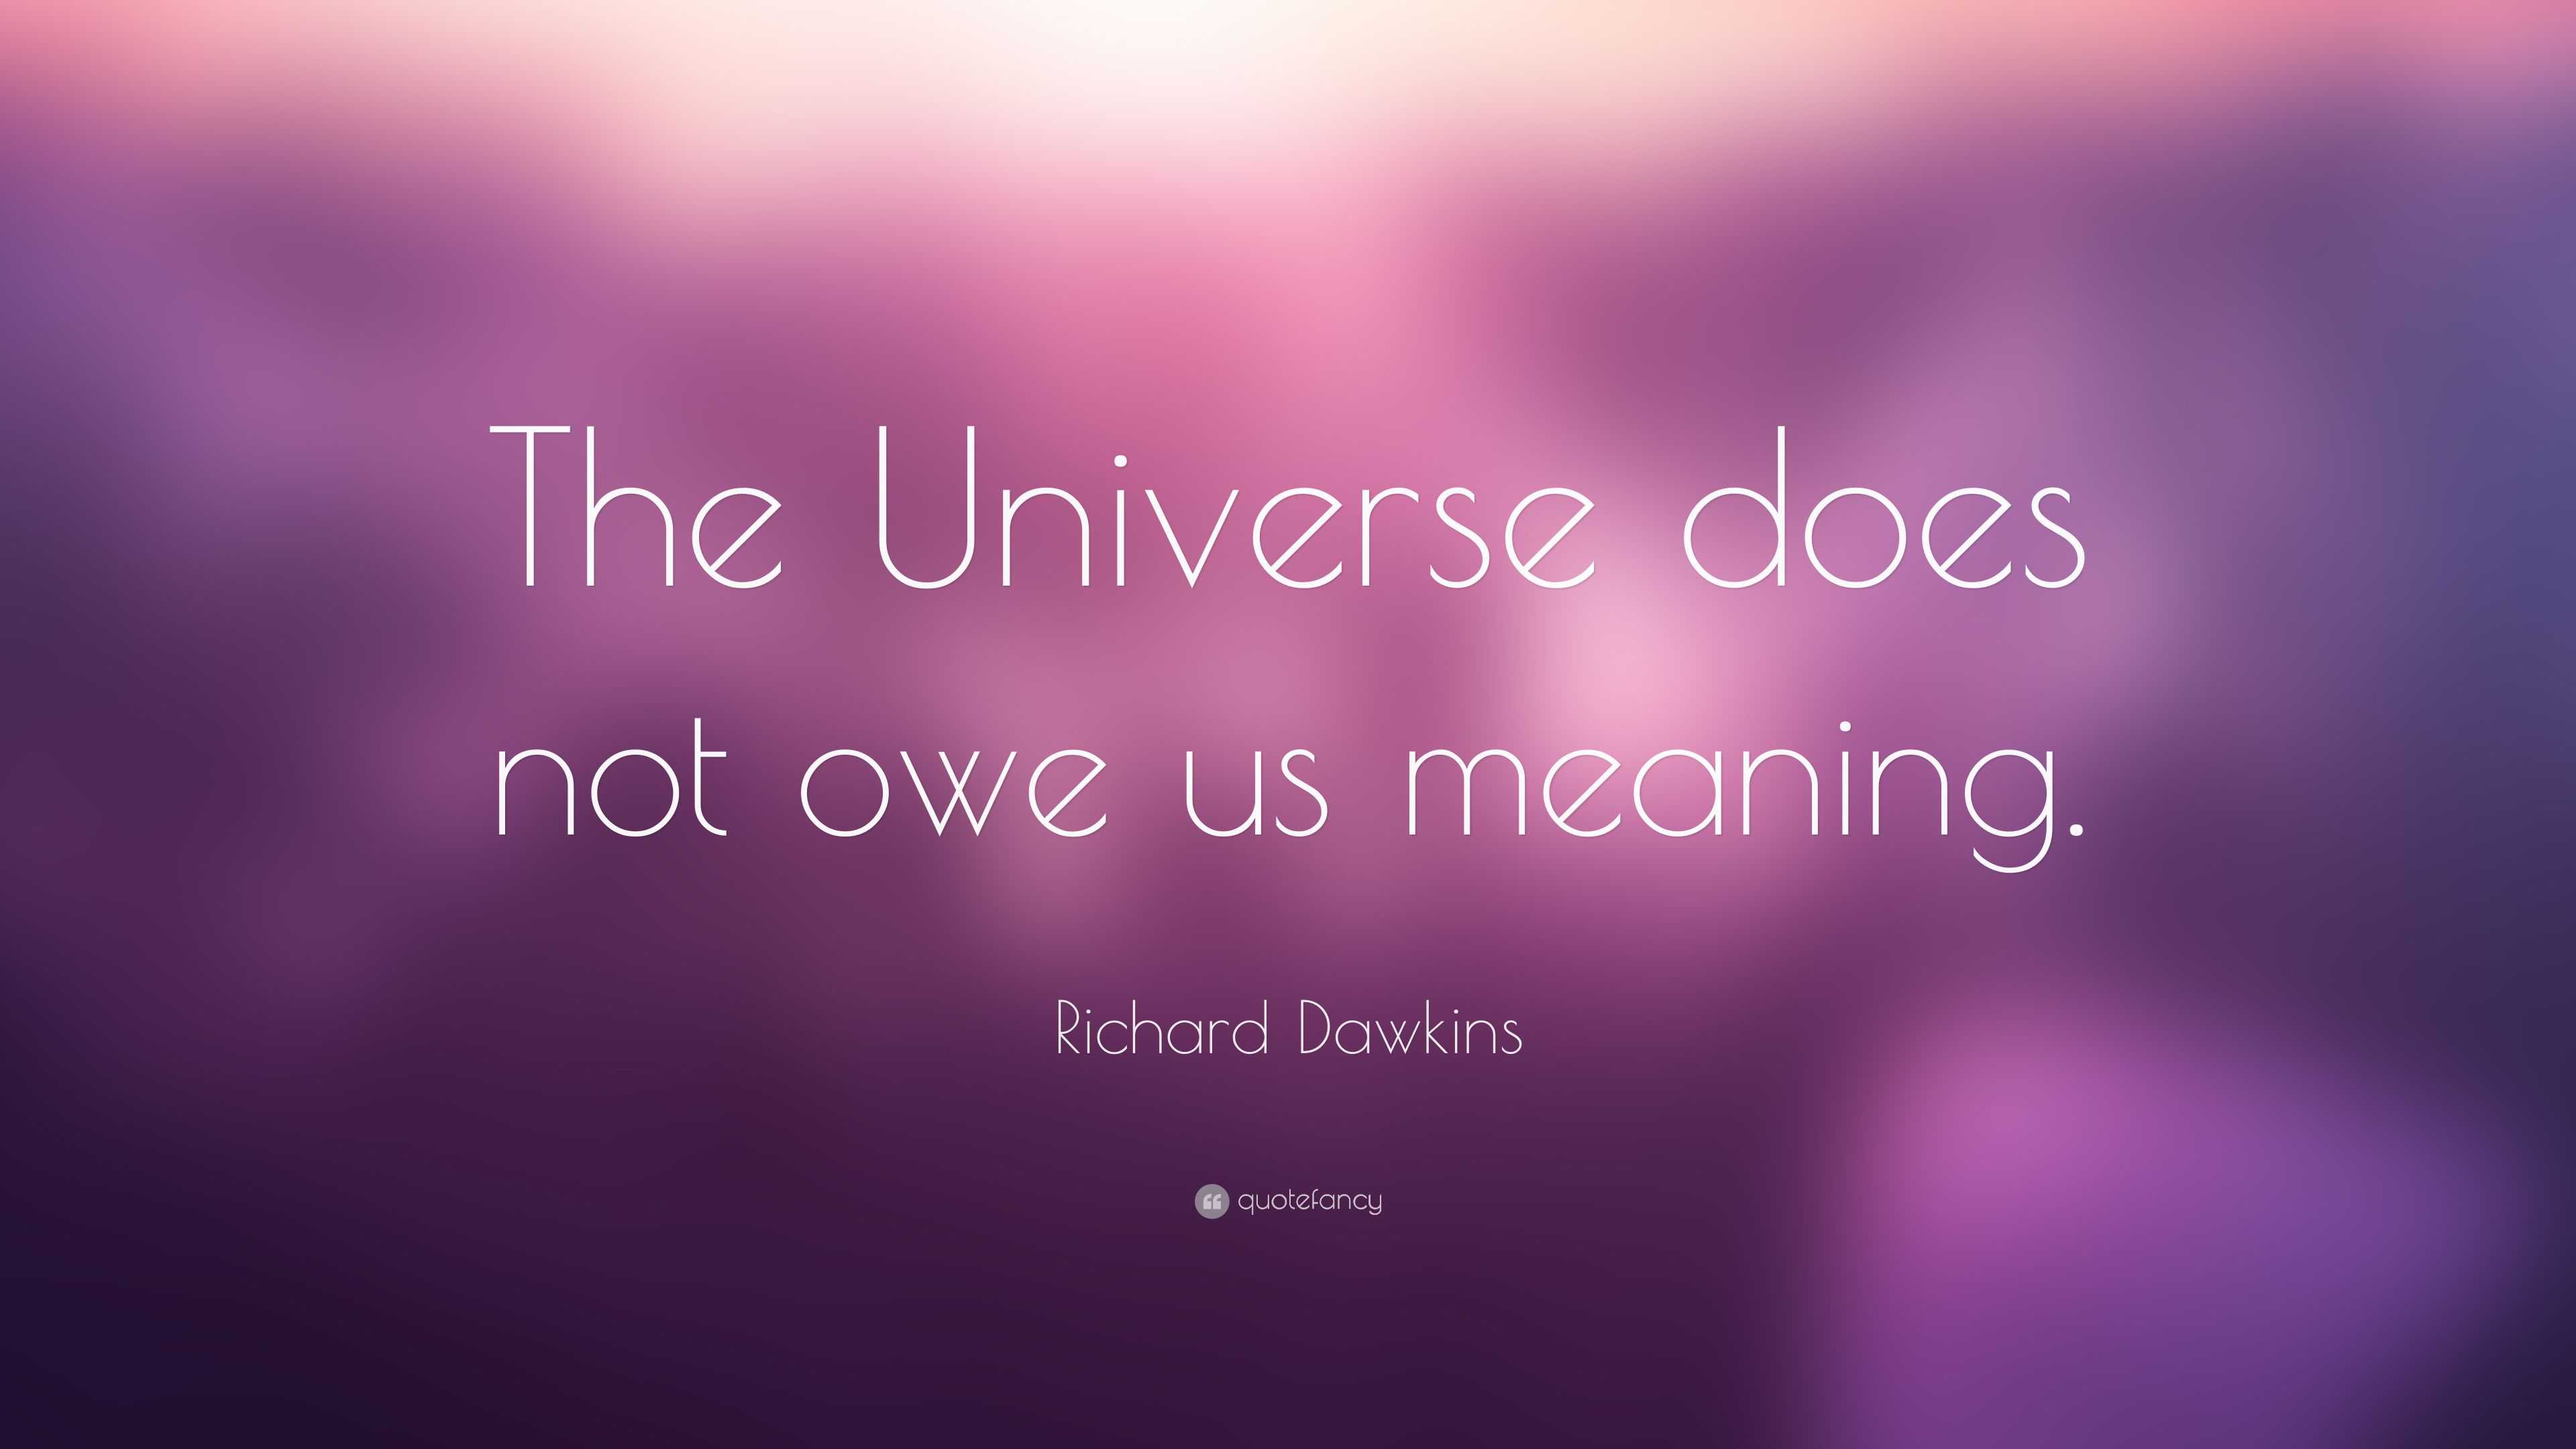 Richard Dawkins Quote: “The Universe does not owe us meaning.”